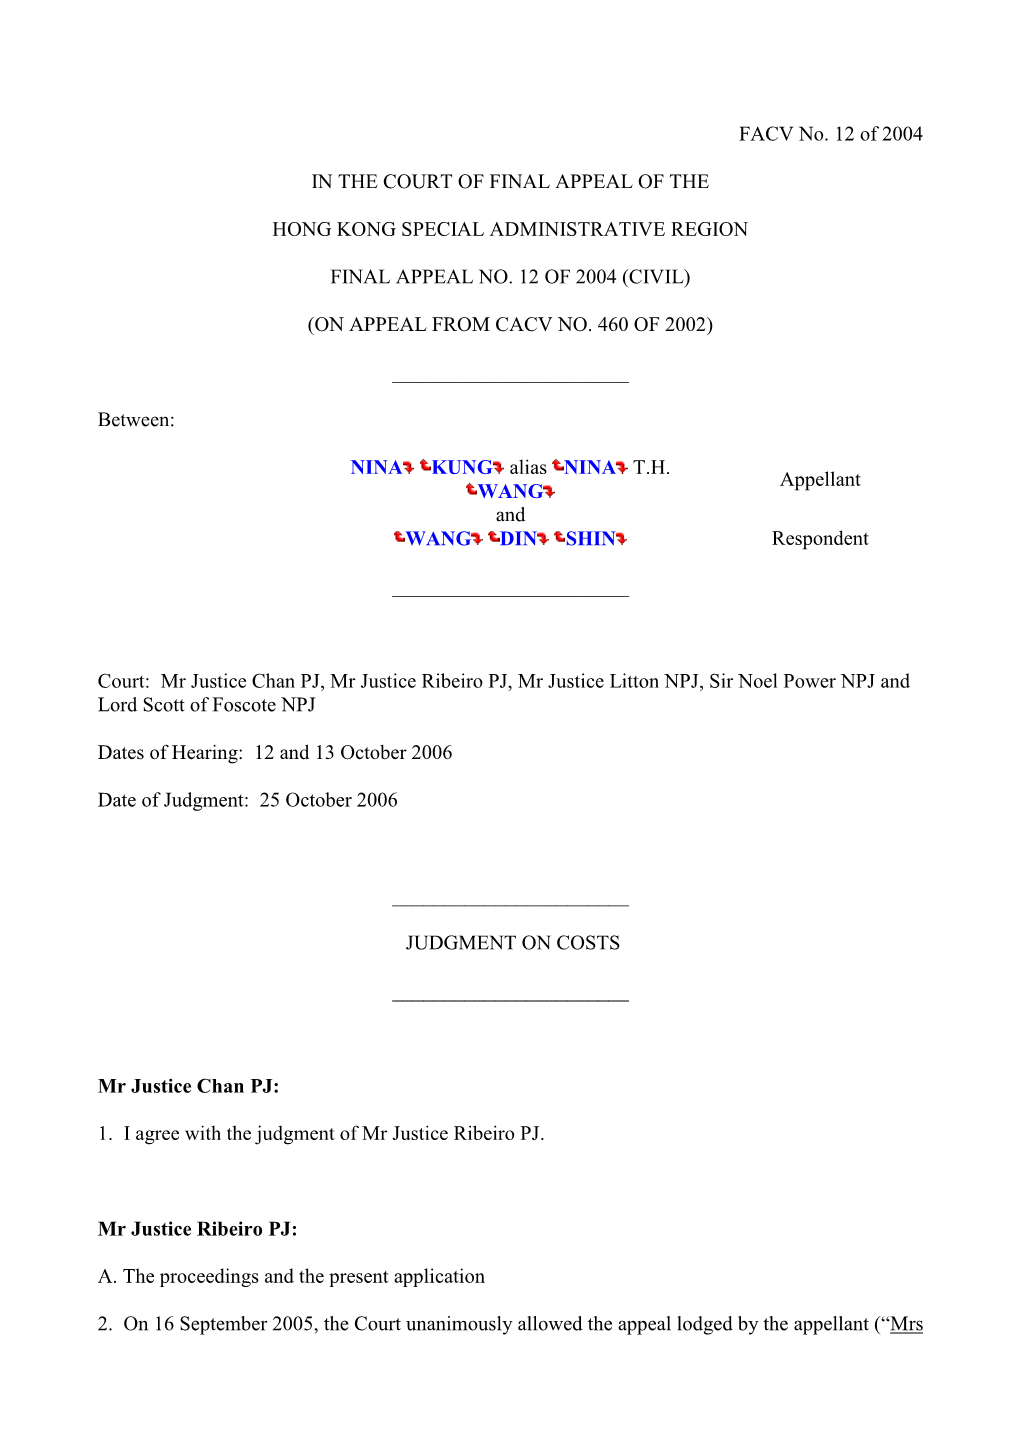 FACV No. 12 of 2004 in the COURT of FINAL APPEAL of the HONG KONG SPECIAL ADMINISTRATIVE REGION FINAL APPEAL NO. 12 of 2004 (CIV